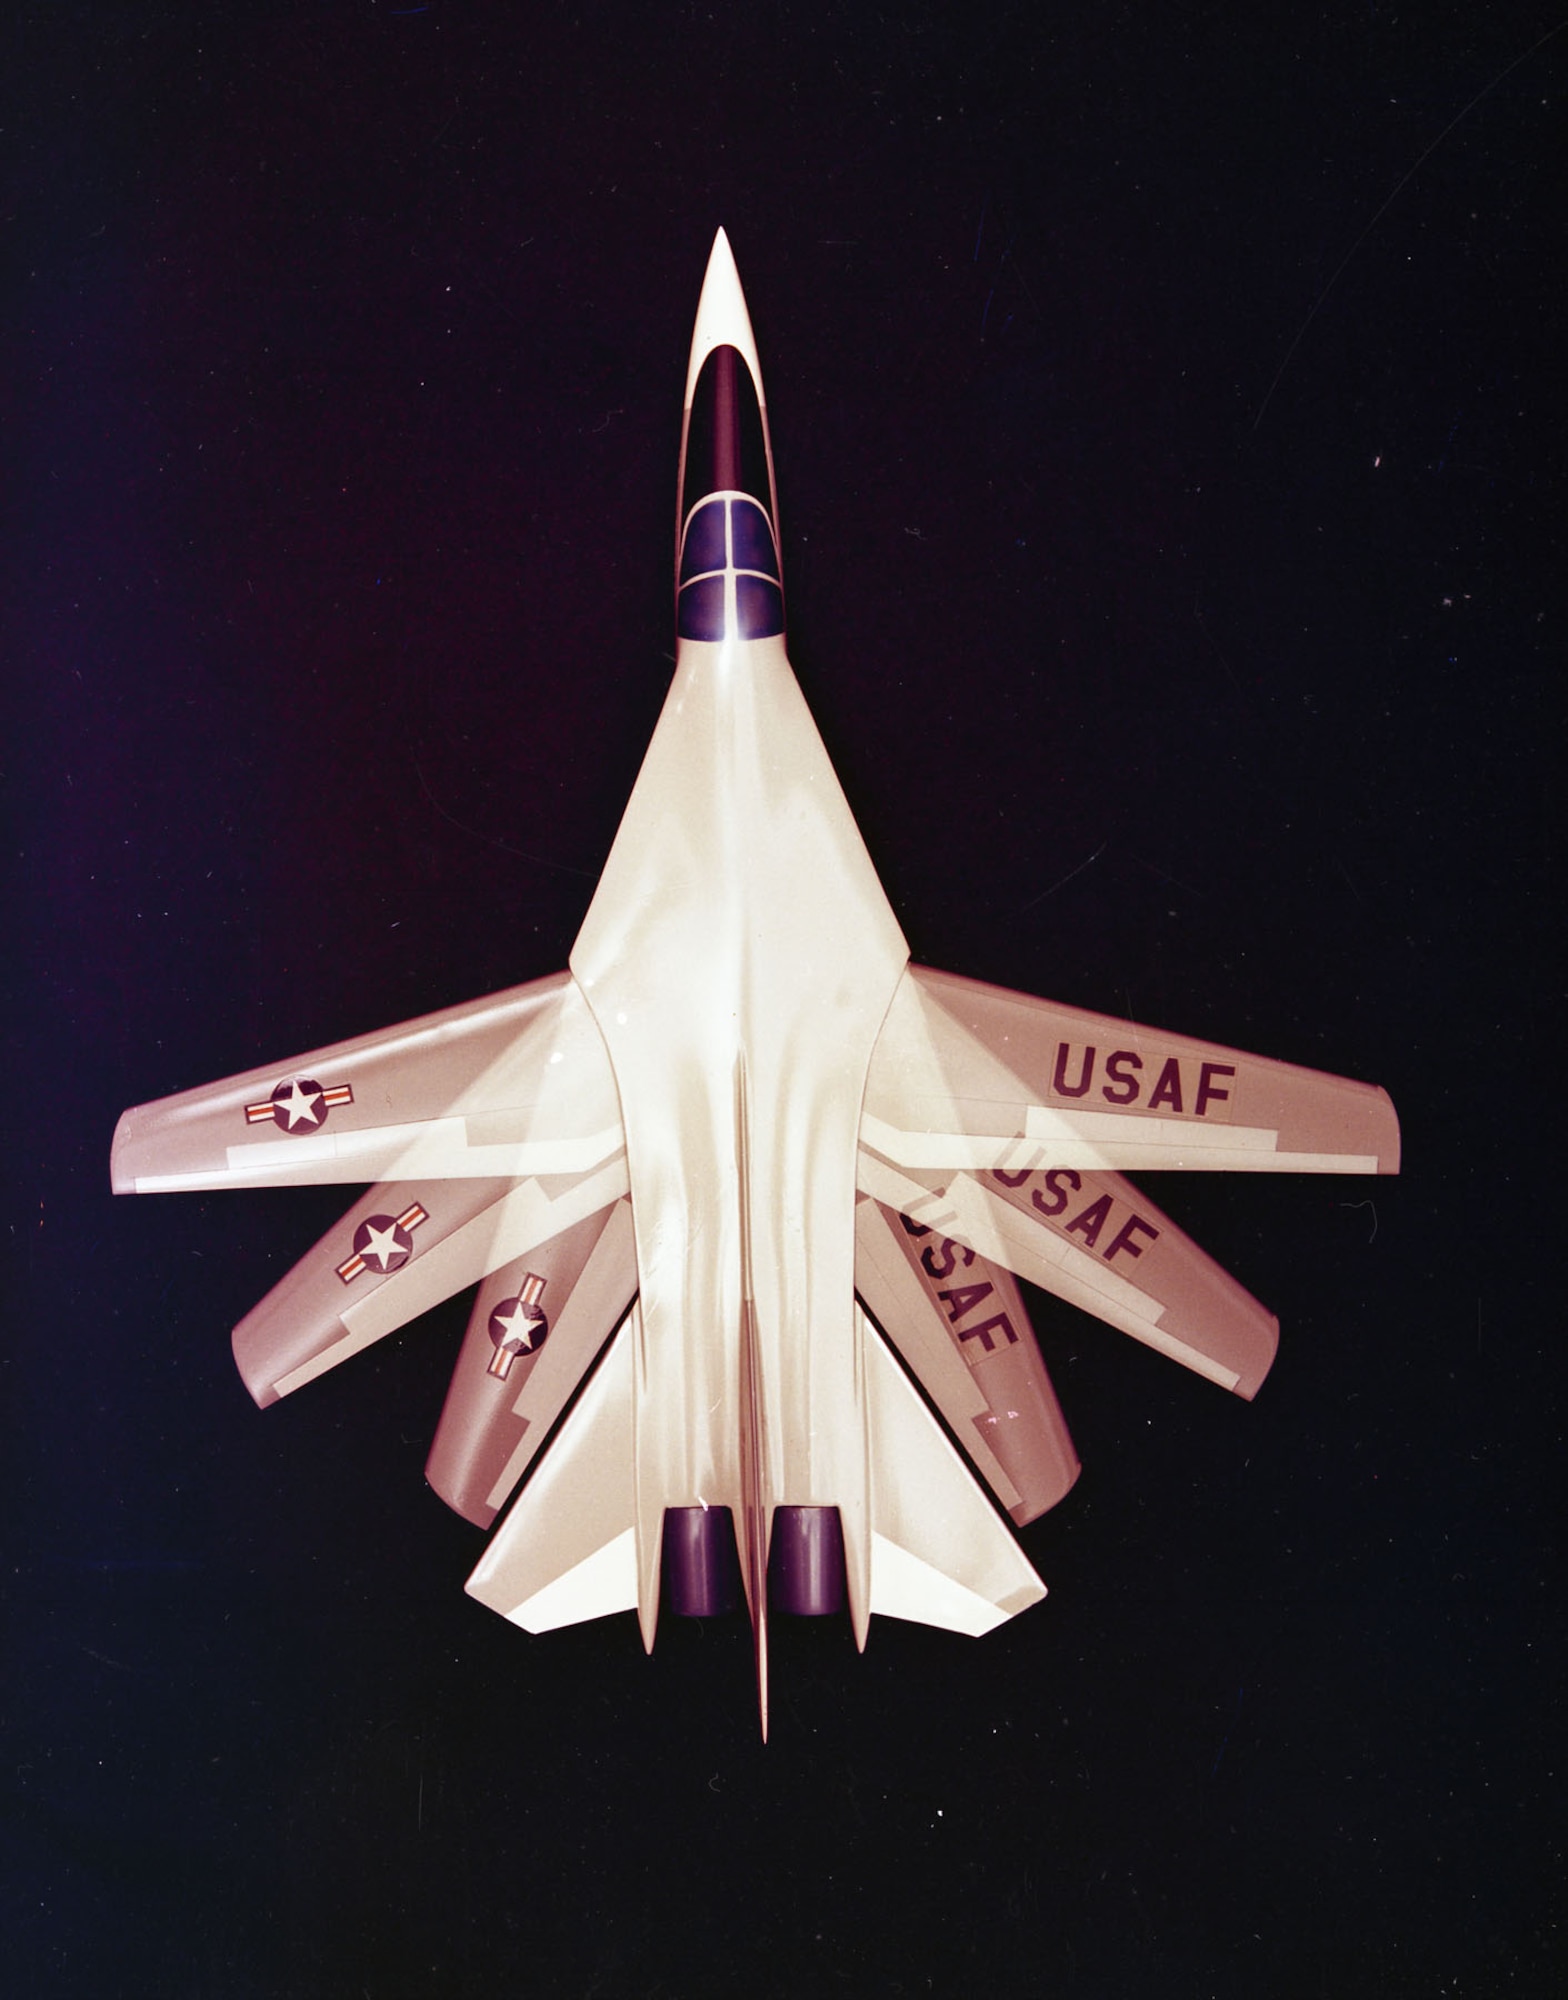 The F-111A could change the angle or “sweep” of its wings in flight. This image shows three different wing positions. With the wings swept forward, the F-111A had more lift to carry heavier loads, and it could land or take off at a slower speed. With the wings swept back, the F-111A could fly at very high speeds. (U.S. Air Force photo)